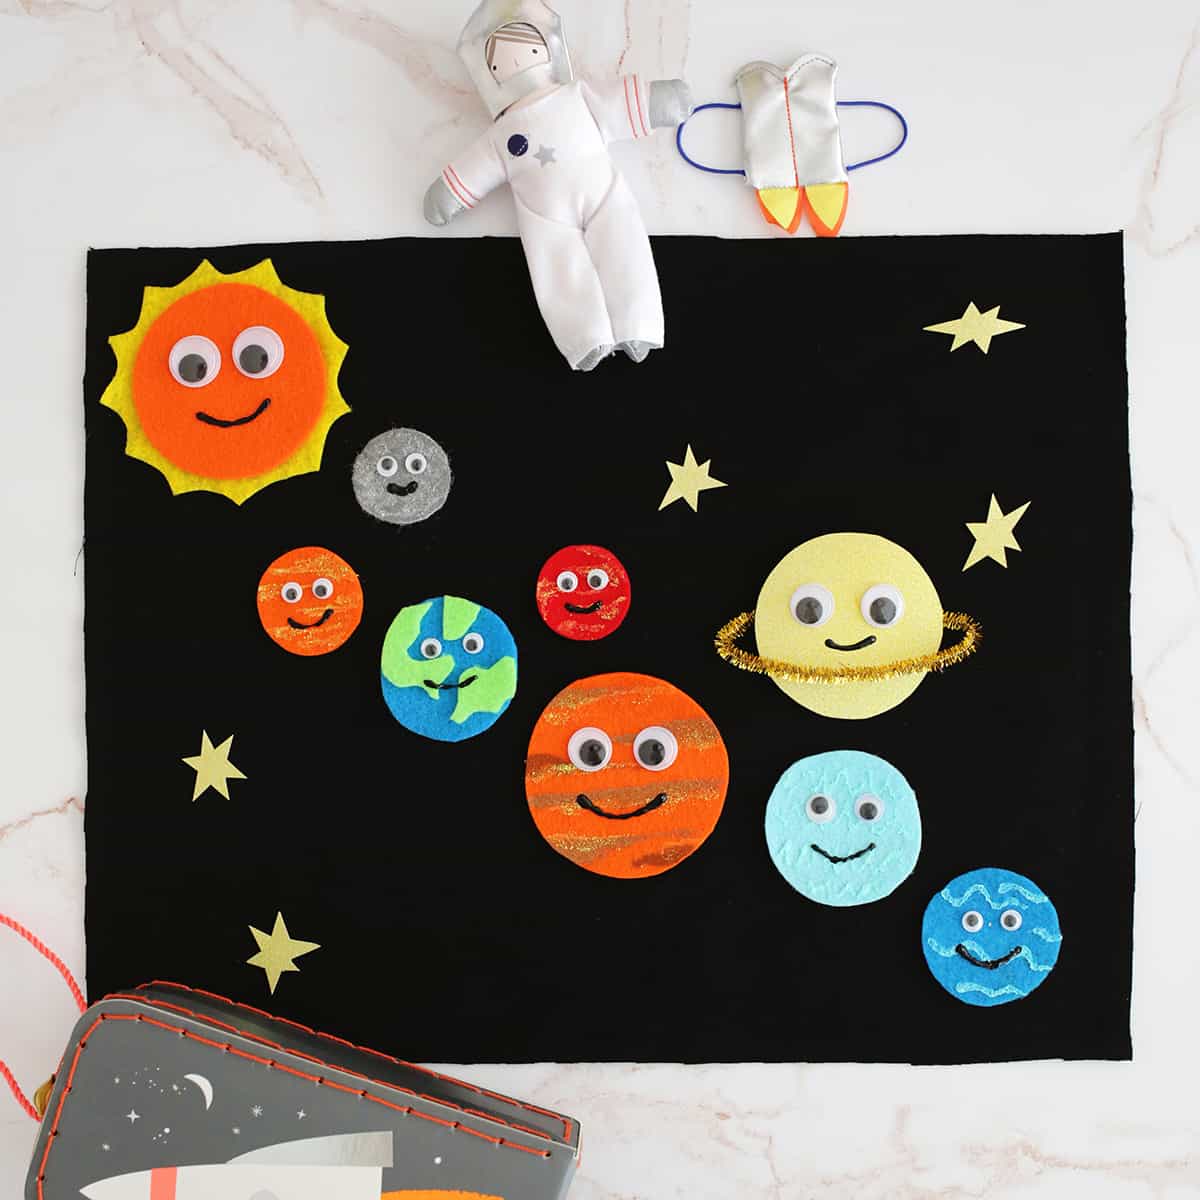 planet craft for kids